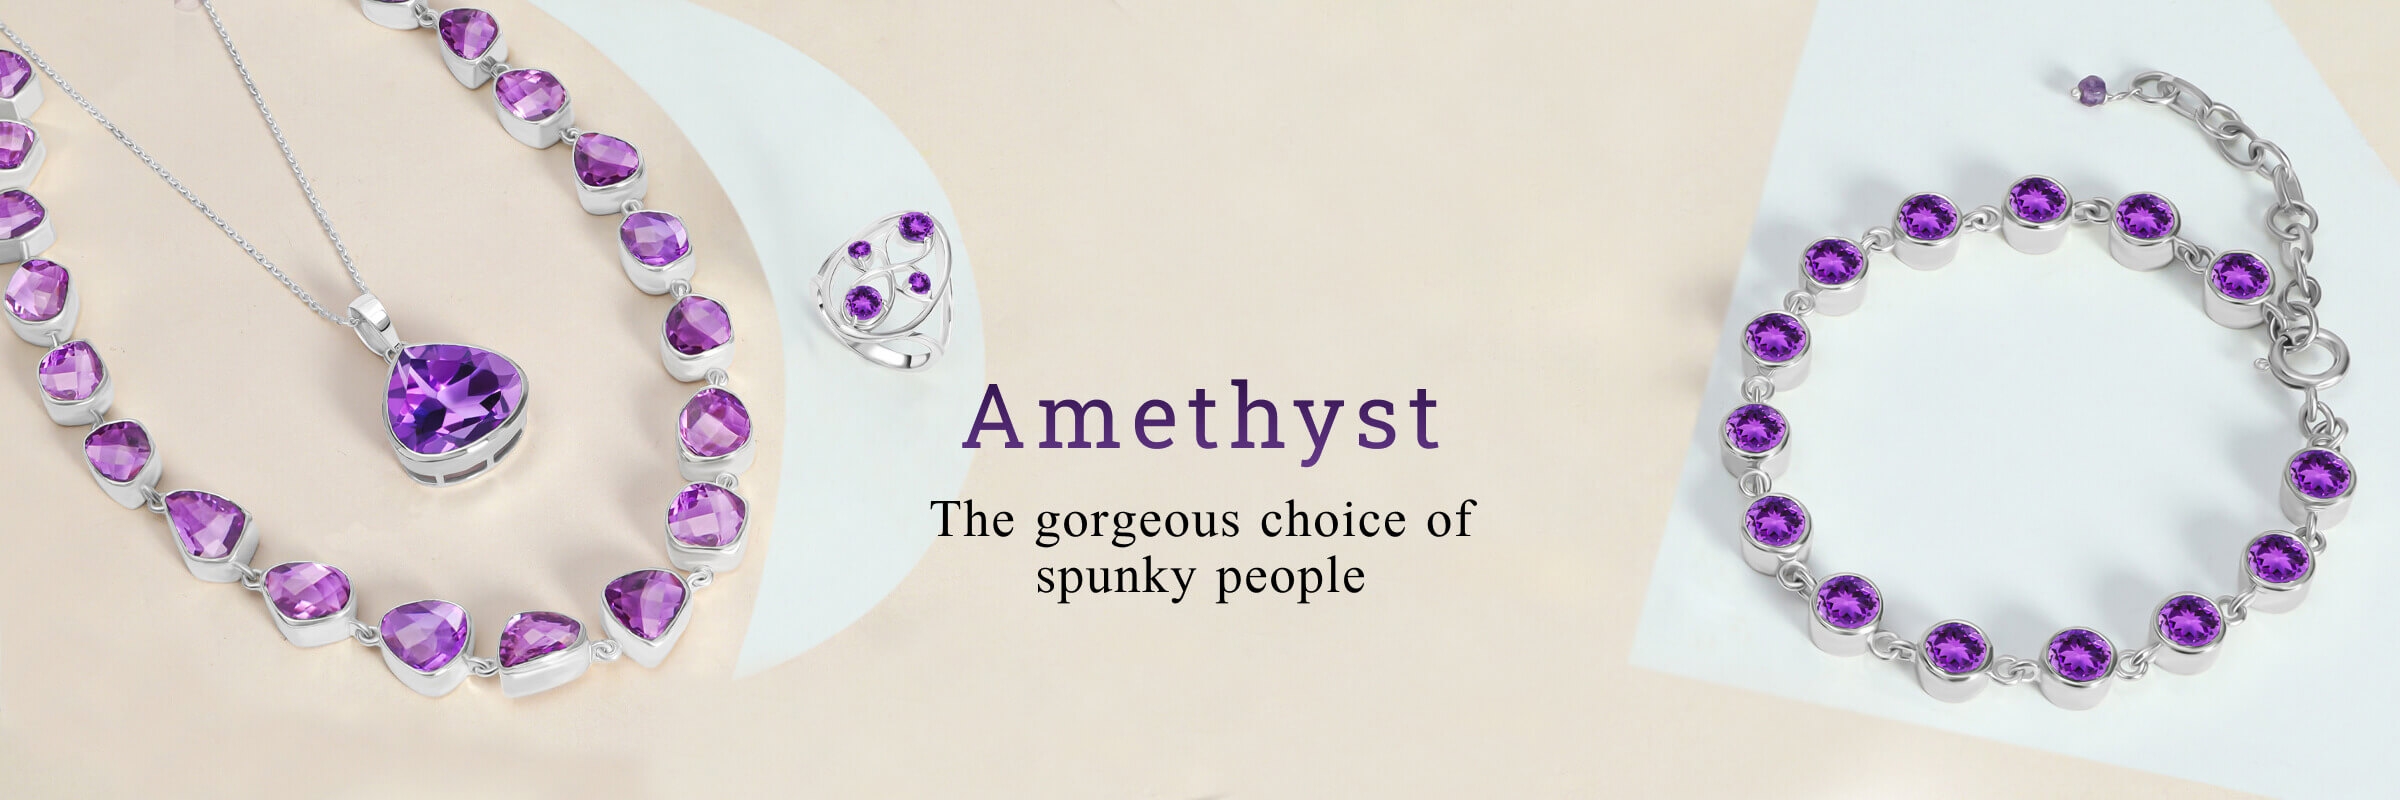 Amethyst - The gorgeous choice of spunky people